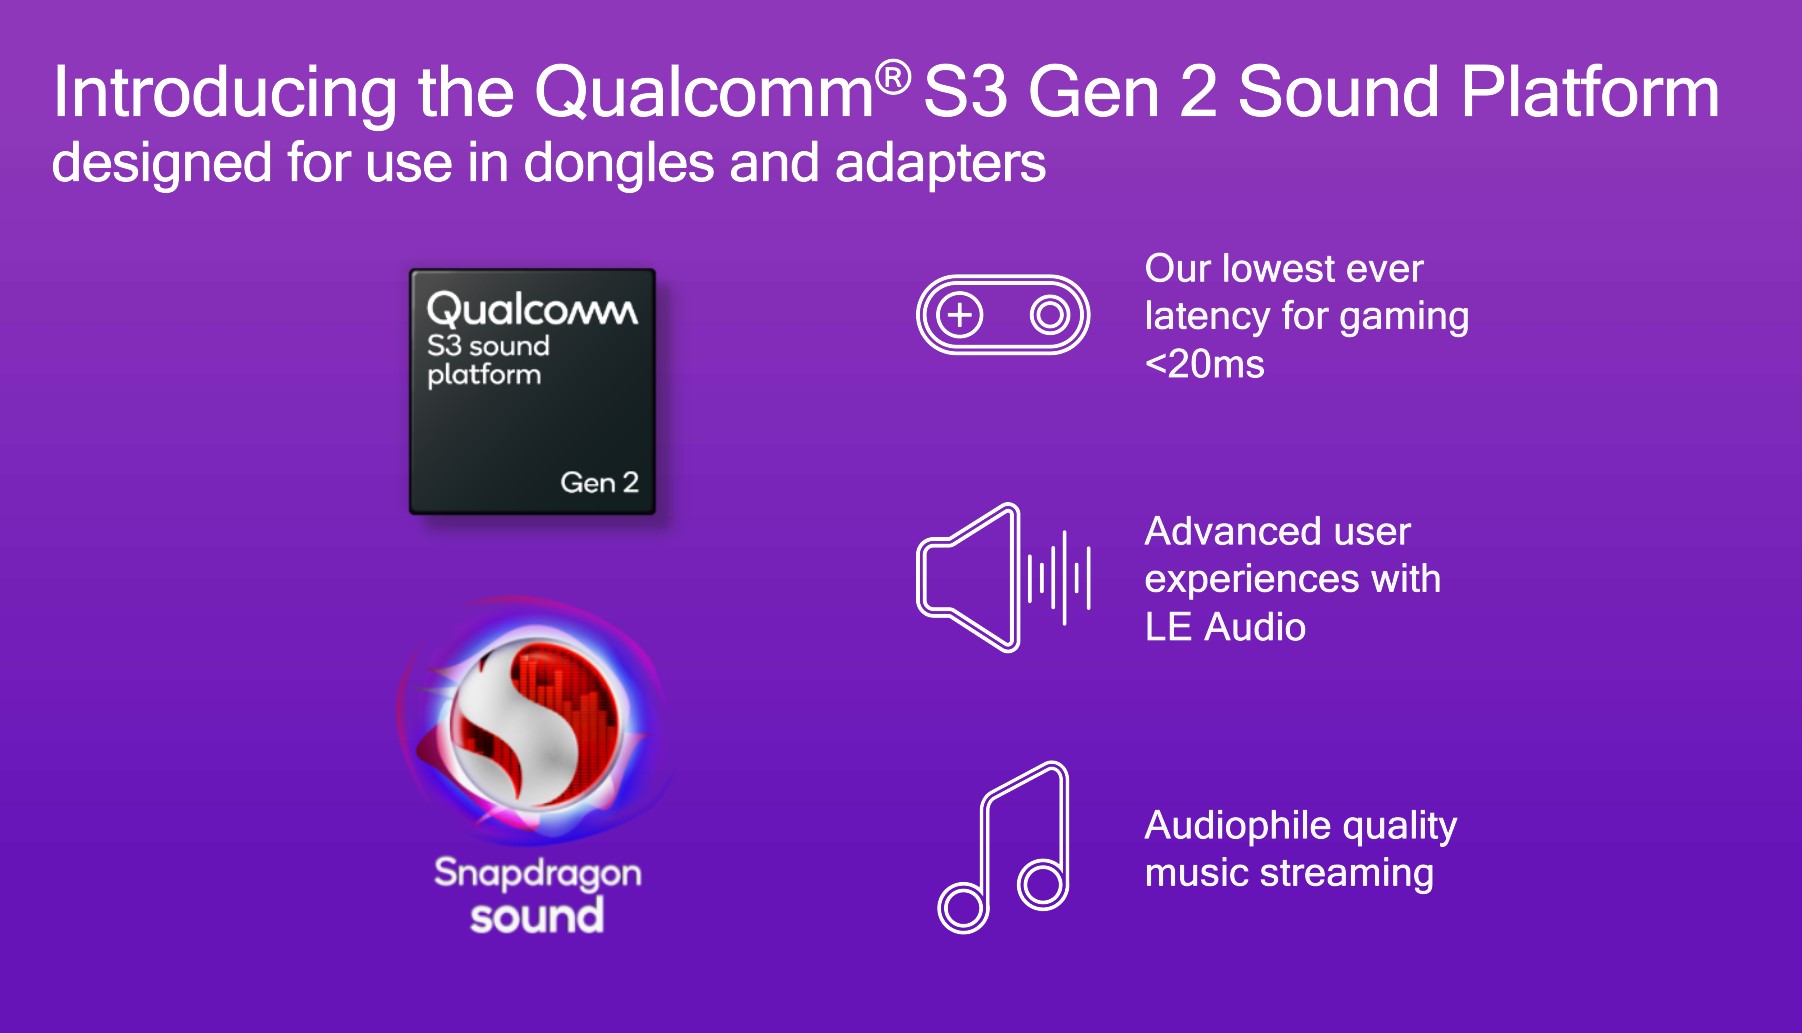 Introducing the Qualcomm S3 Gen 2 Sound Platform designed for use in dongles and adapters